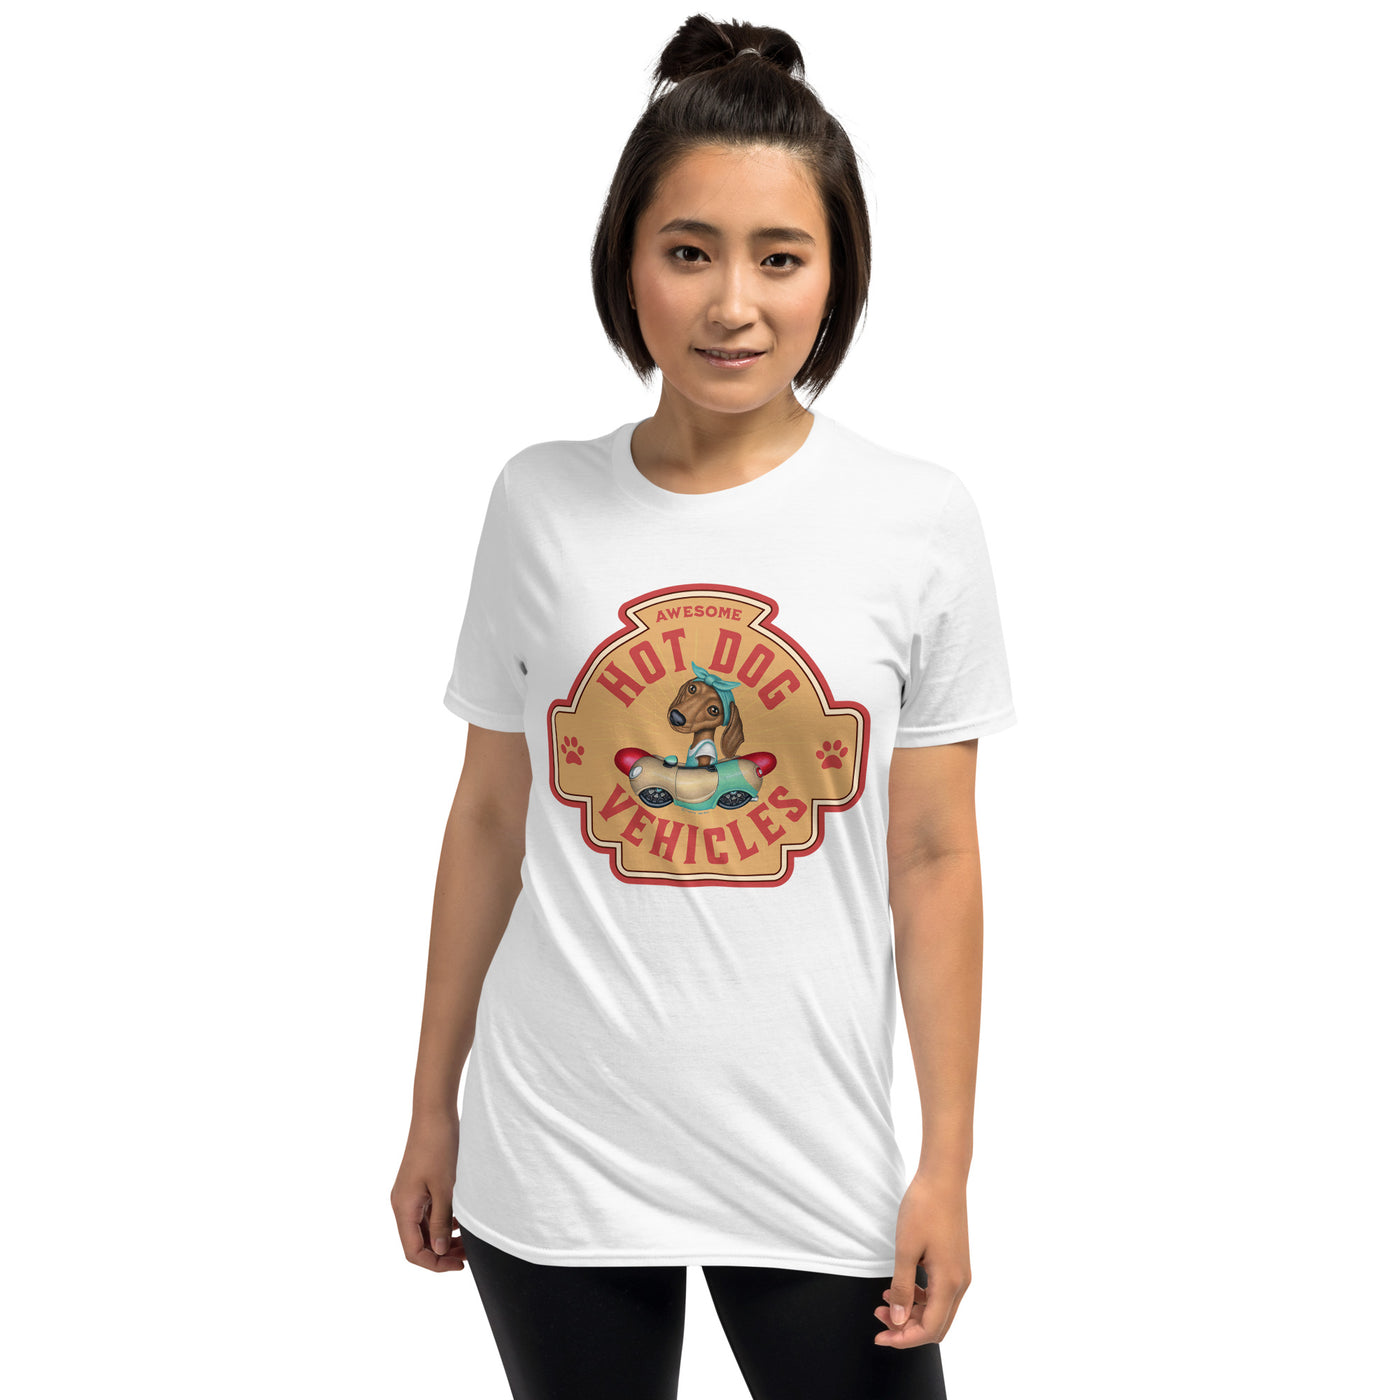 Cute and adorable Doxie Dachshund Dog in a classic car shopping on a Short-Sleeve Unisex T-Shirt